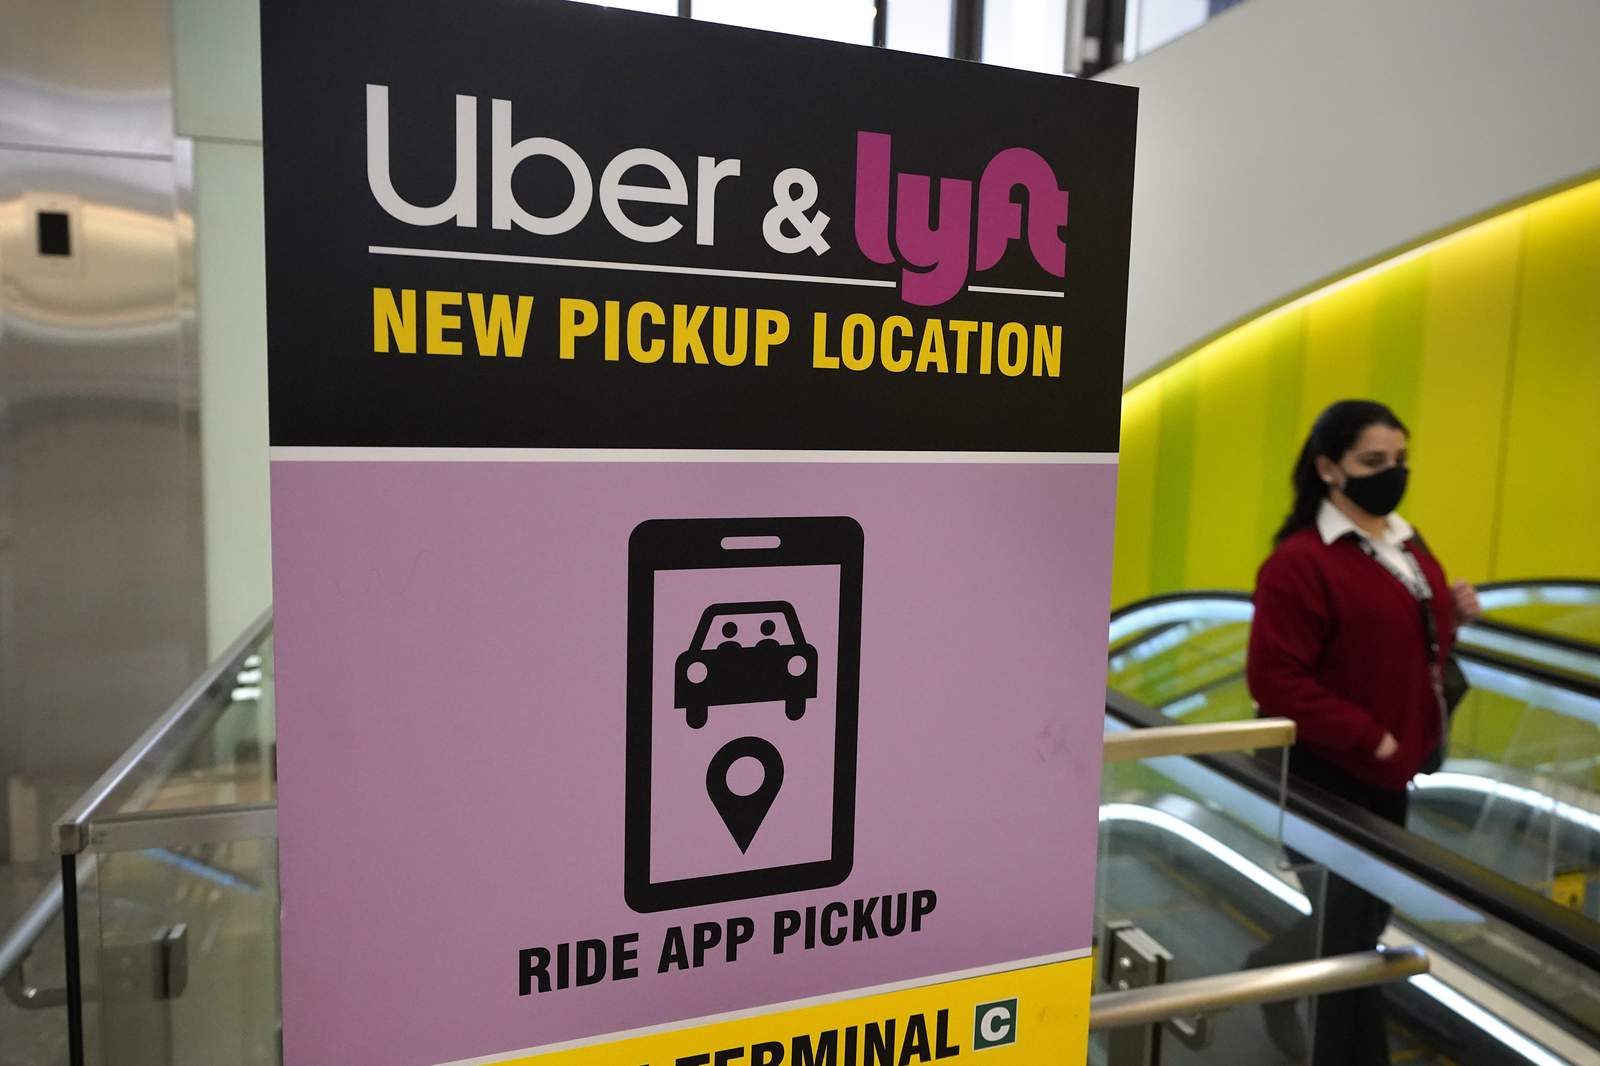 Uber, Lyft team up on database to expose abusive drivers